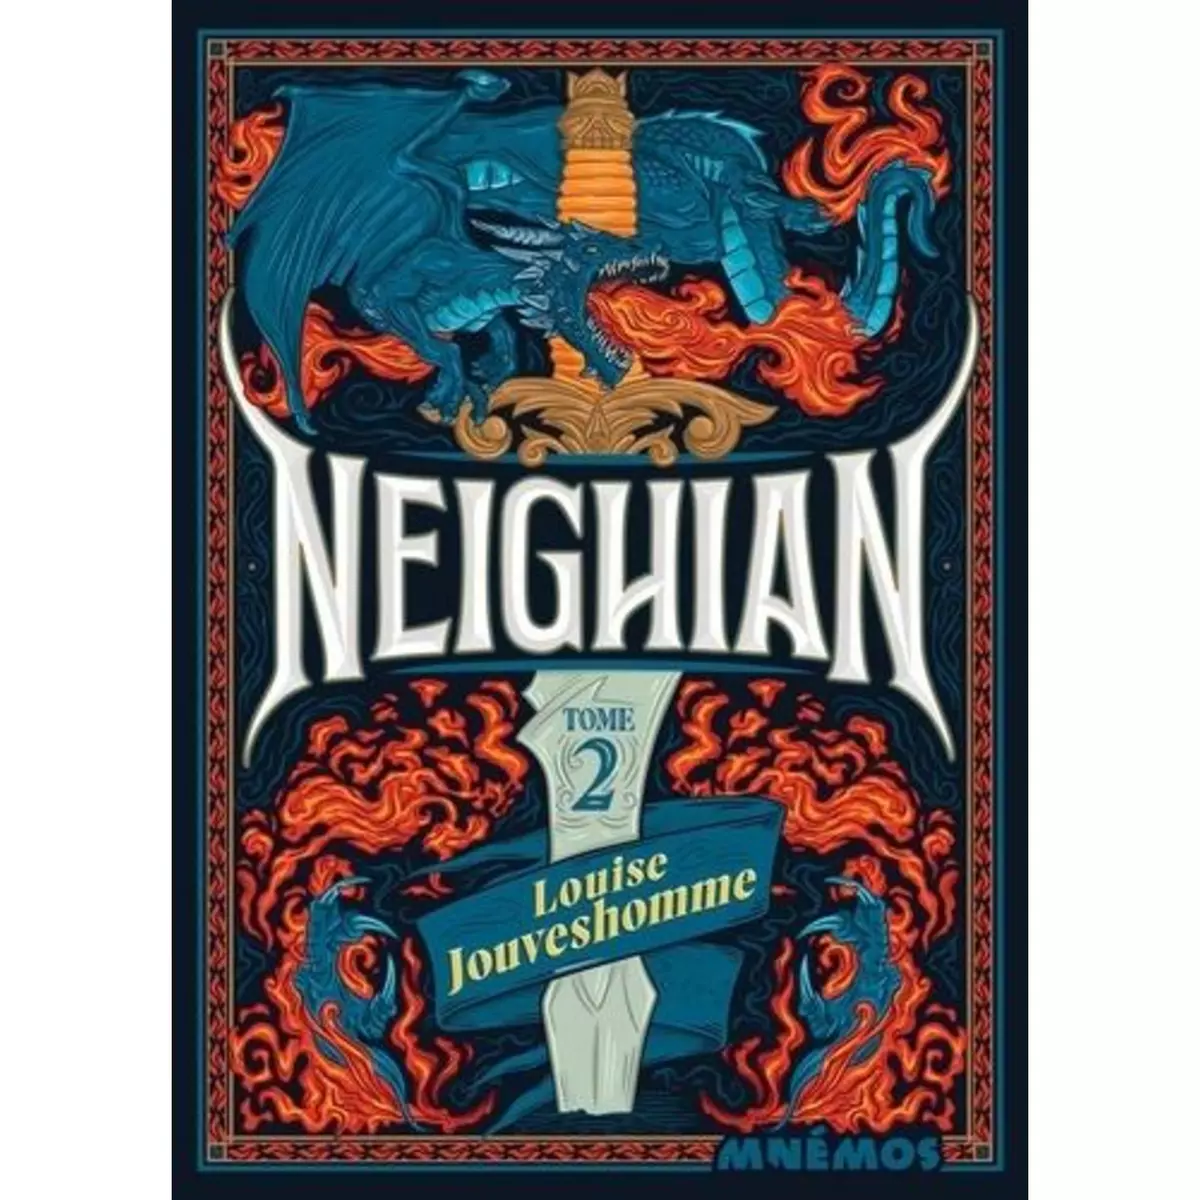  NEIGHIAN TOME 2 , Jouveshomme Louise